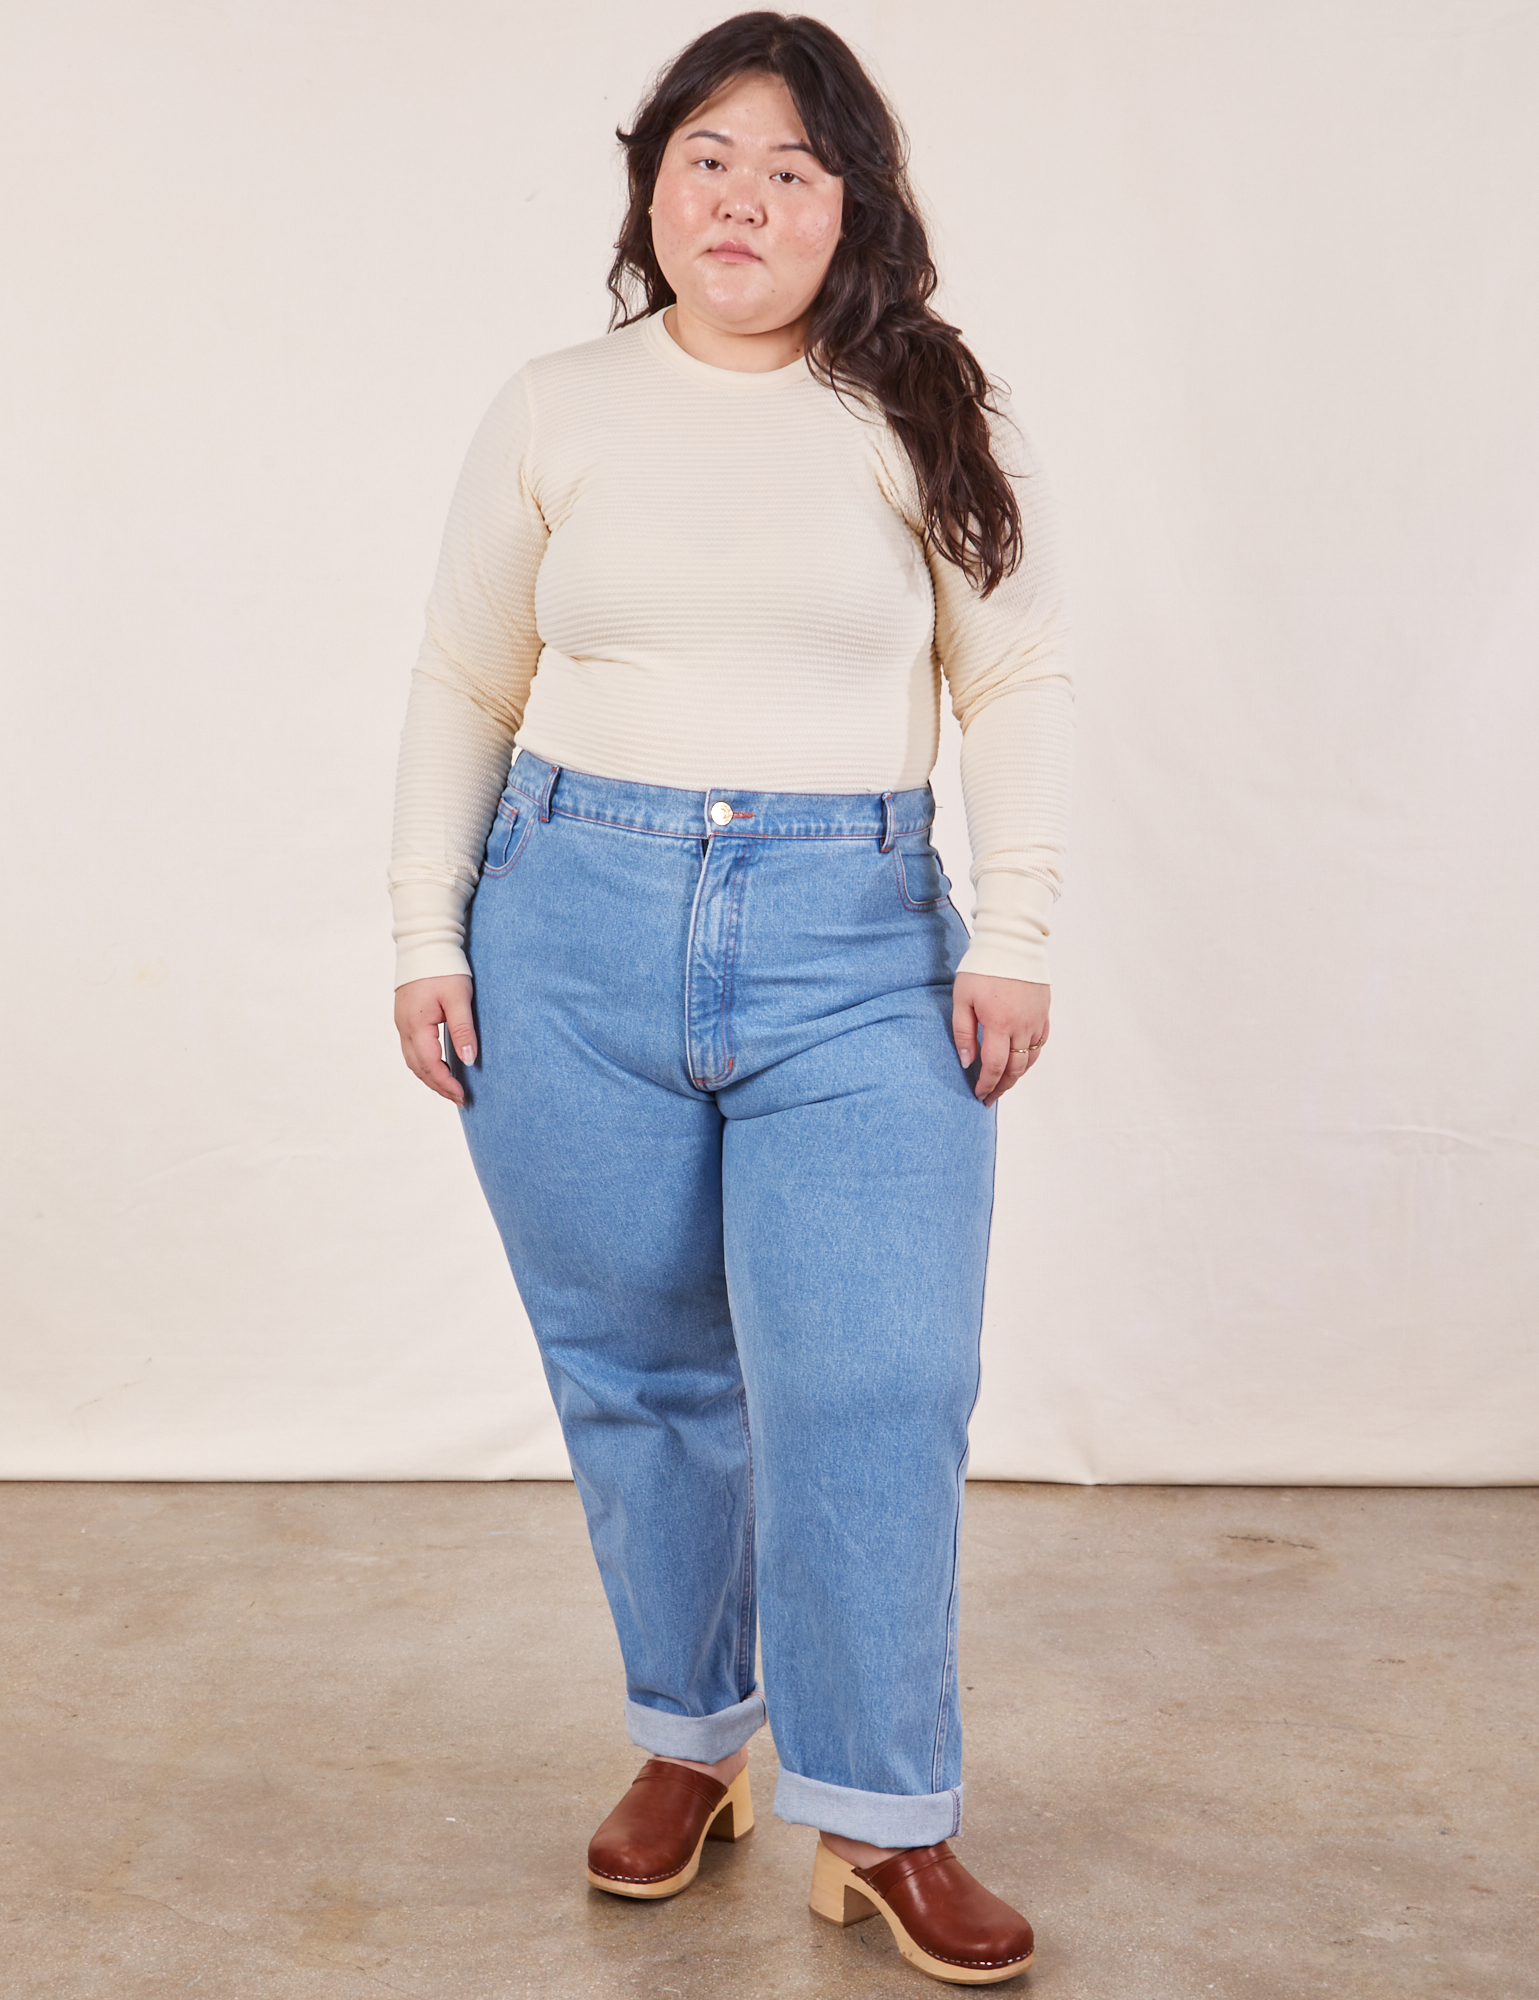 Ashley is wearing Honeycomb Thermal in Vintage Off-White tucked into light wash Frontier Jeans